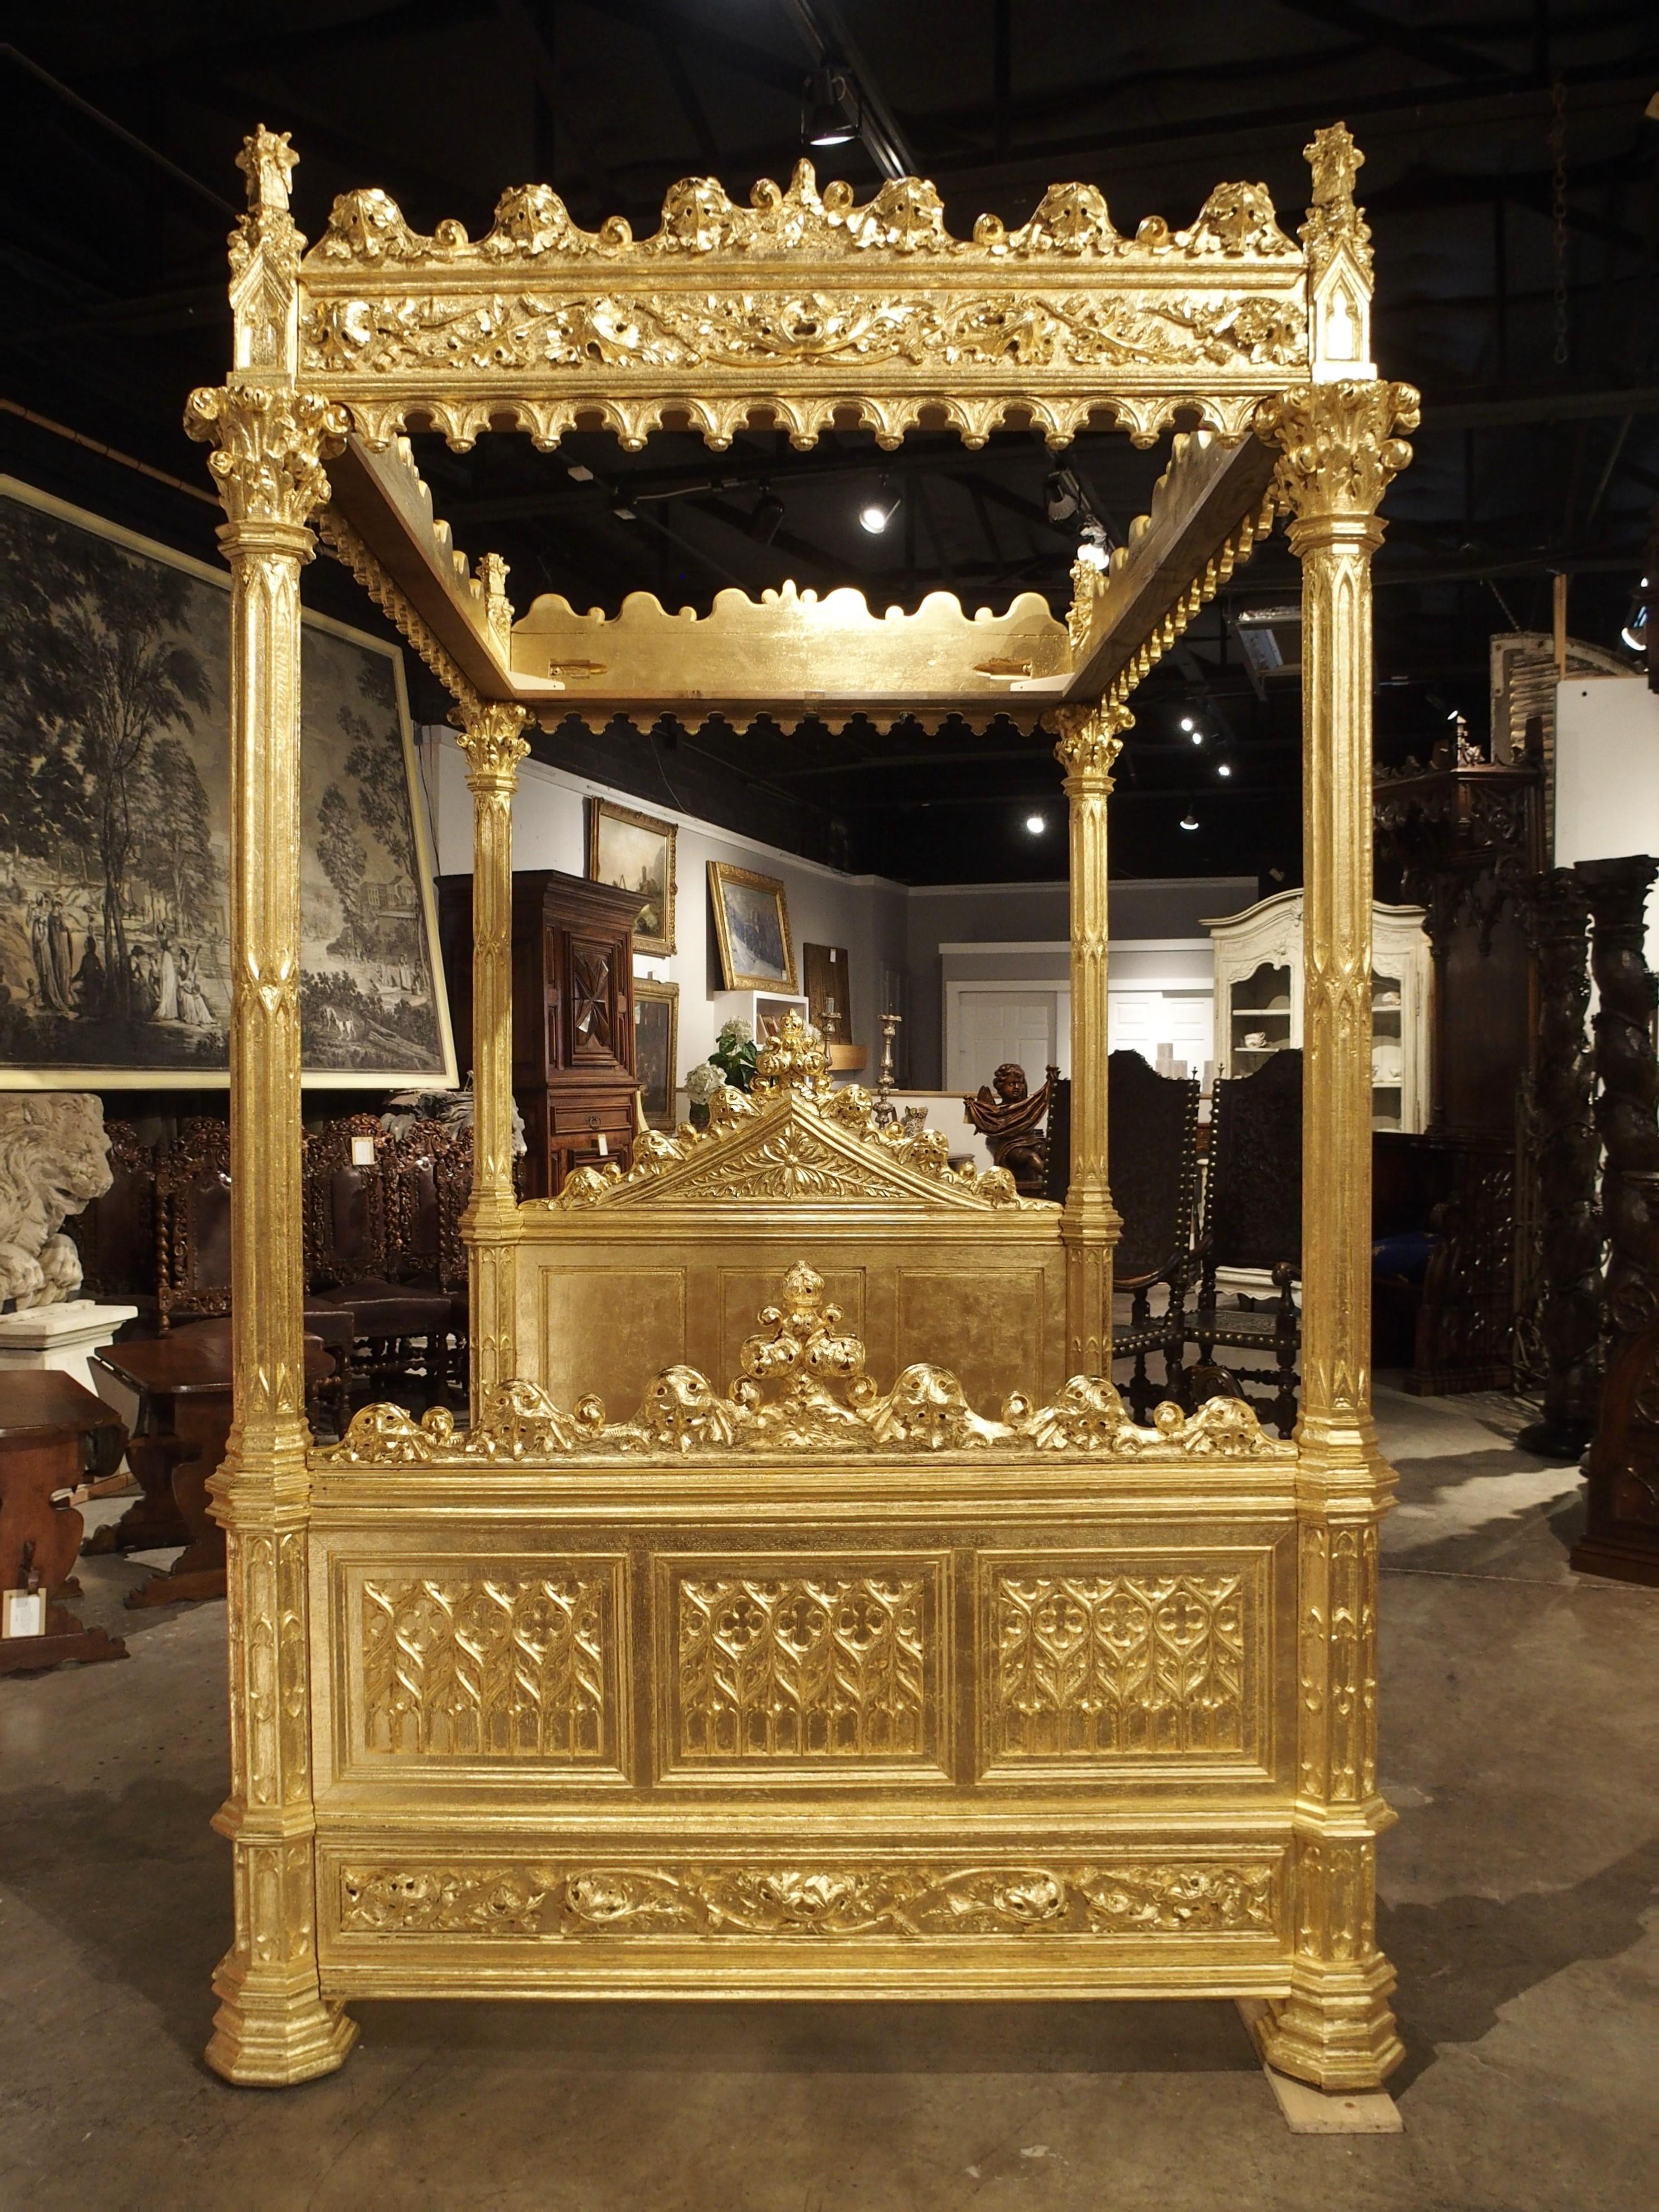 Hand-Carved Magnificent Fully Carved Antique French Gothic Bed in 23.5-Karat Gold Leaf